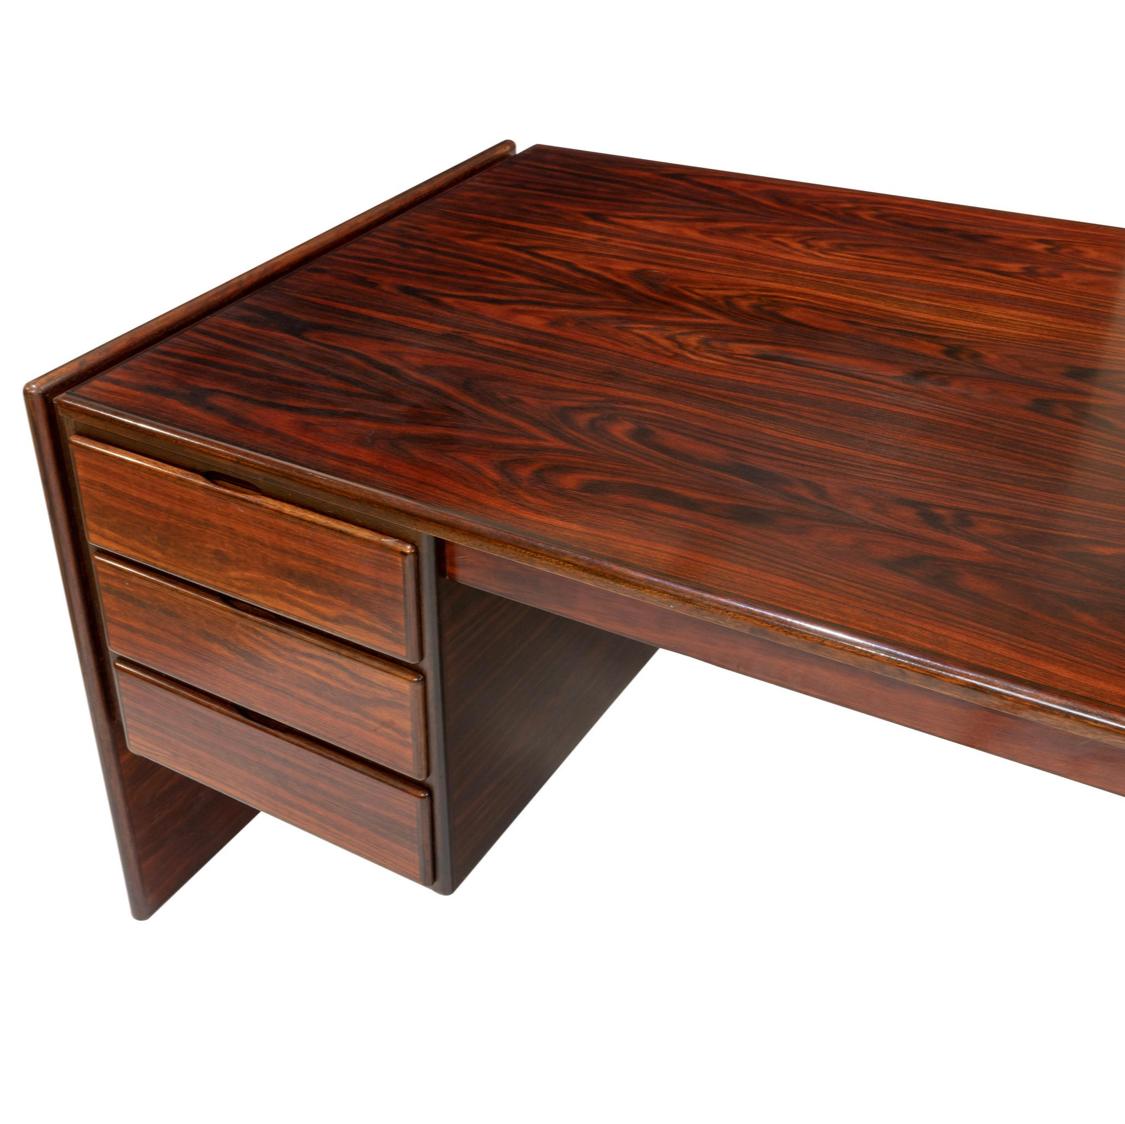 Spectacular Danish modern rosewood executive desk. Amazing depth of brilliant color and highly figured grain detail. Due to environmental regulations rosewood is no longer allowed to be used for furniture production. Simple yet striking minimal